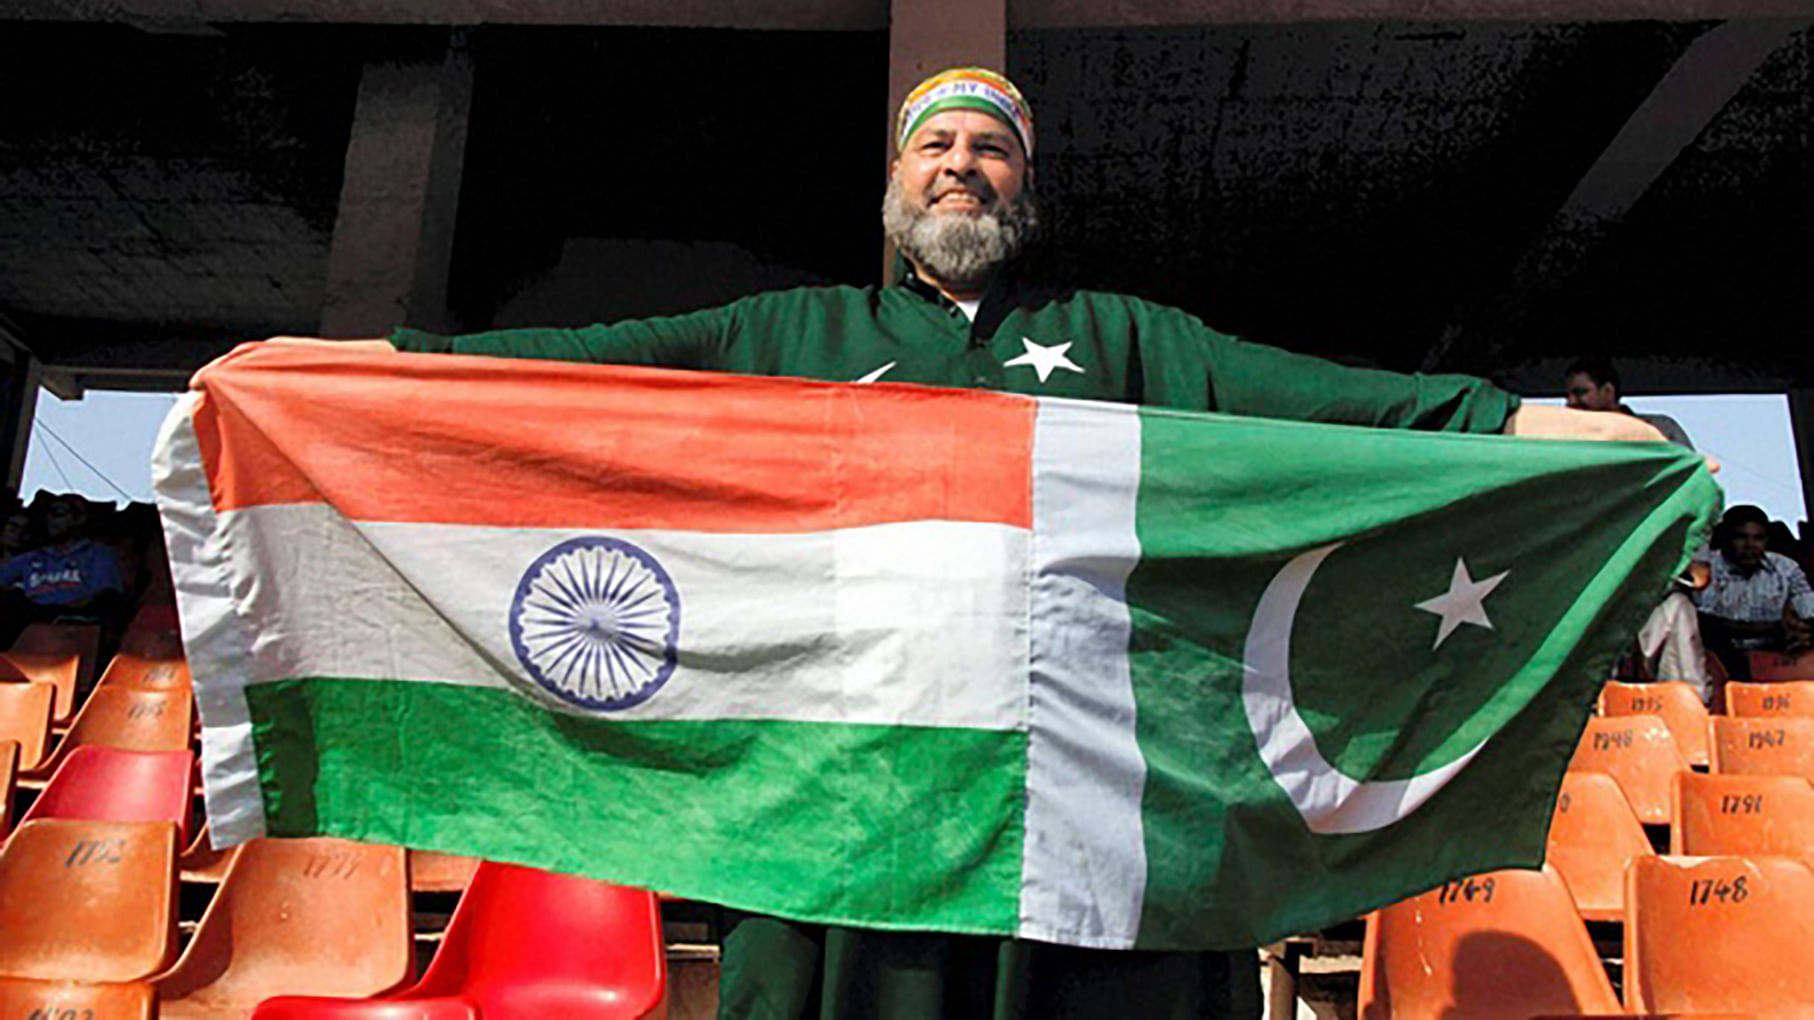 Mohammad Bashir, a cricket fan displays flags of both India and Pakistan during a T20 cricket match between India and Pakistan in Ahmedabad. (Photo: PTI)